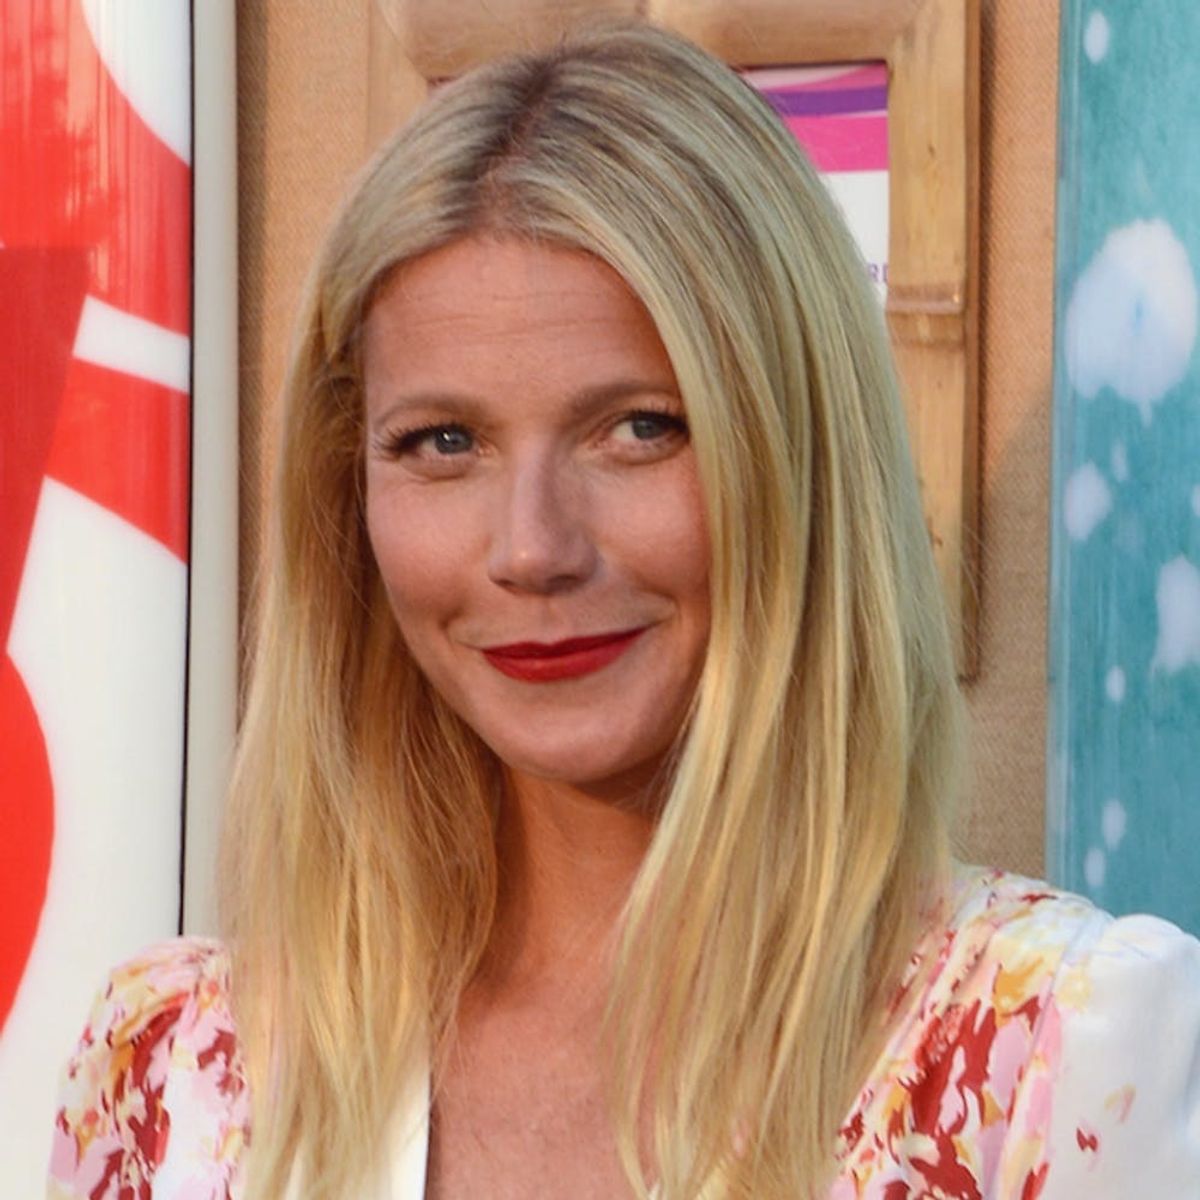 Gwyneth Paltrow’s Fast Food Hacks Miss the Point of Indulging